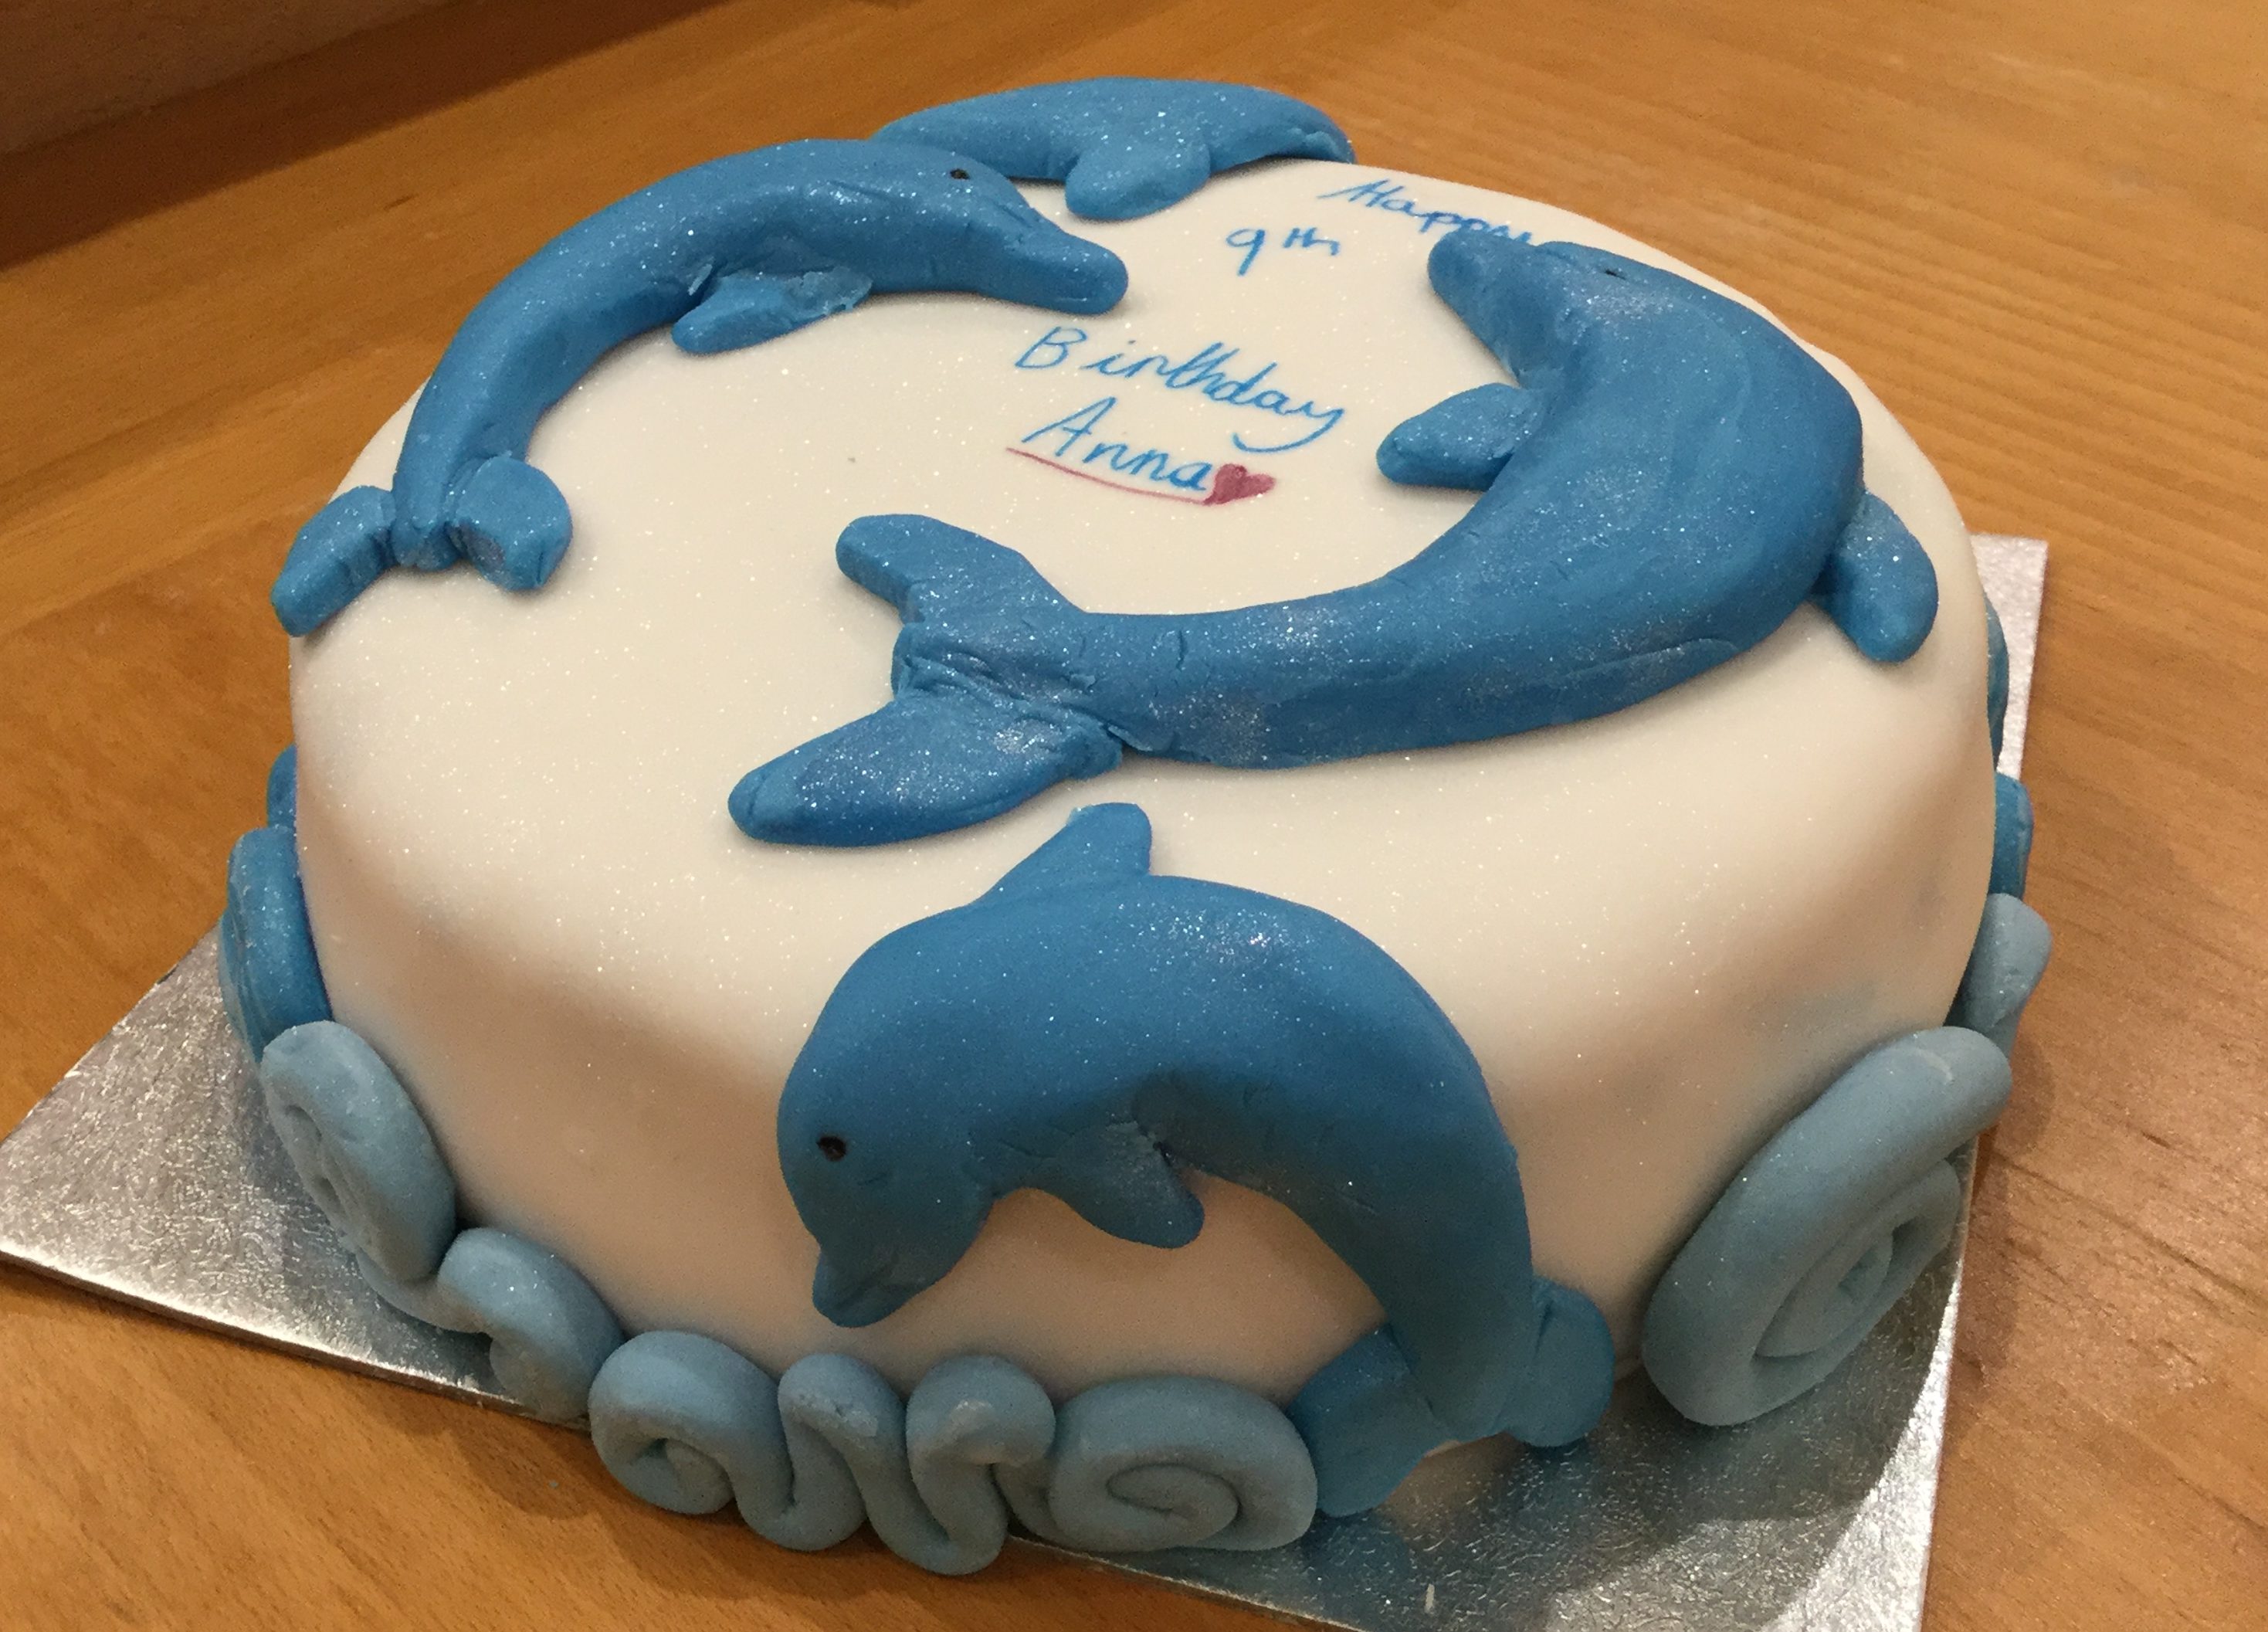 Dolphin Birthday Cake For Our 8 Year Old Daughter - CakeCentral.com